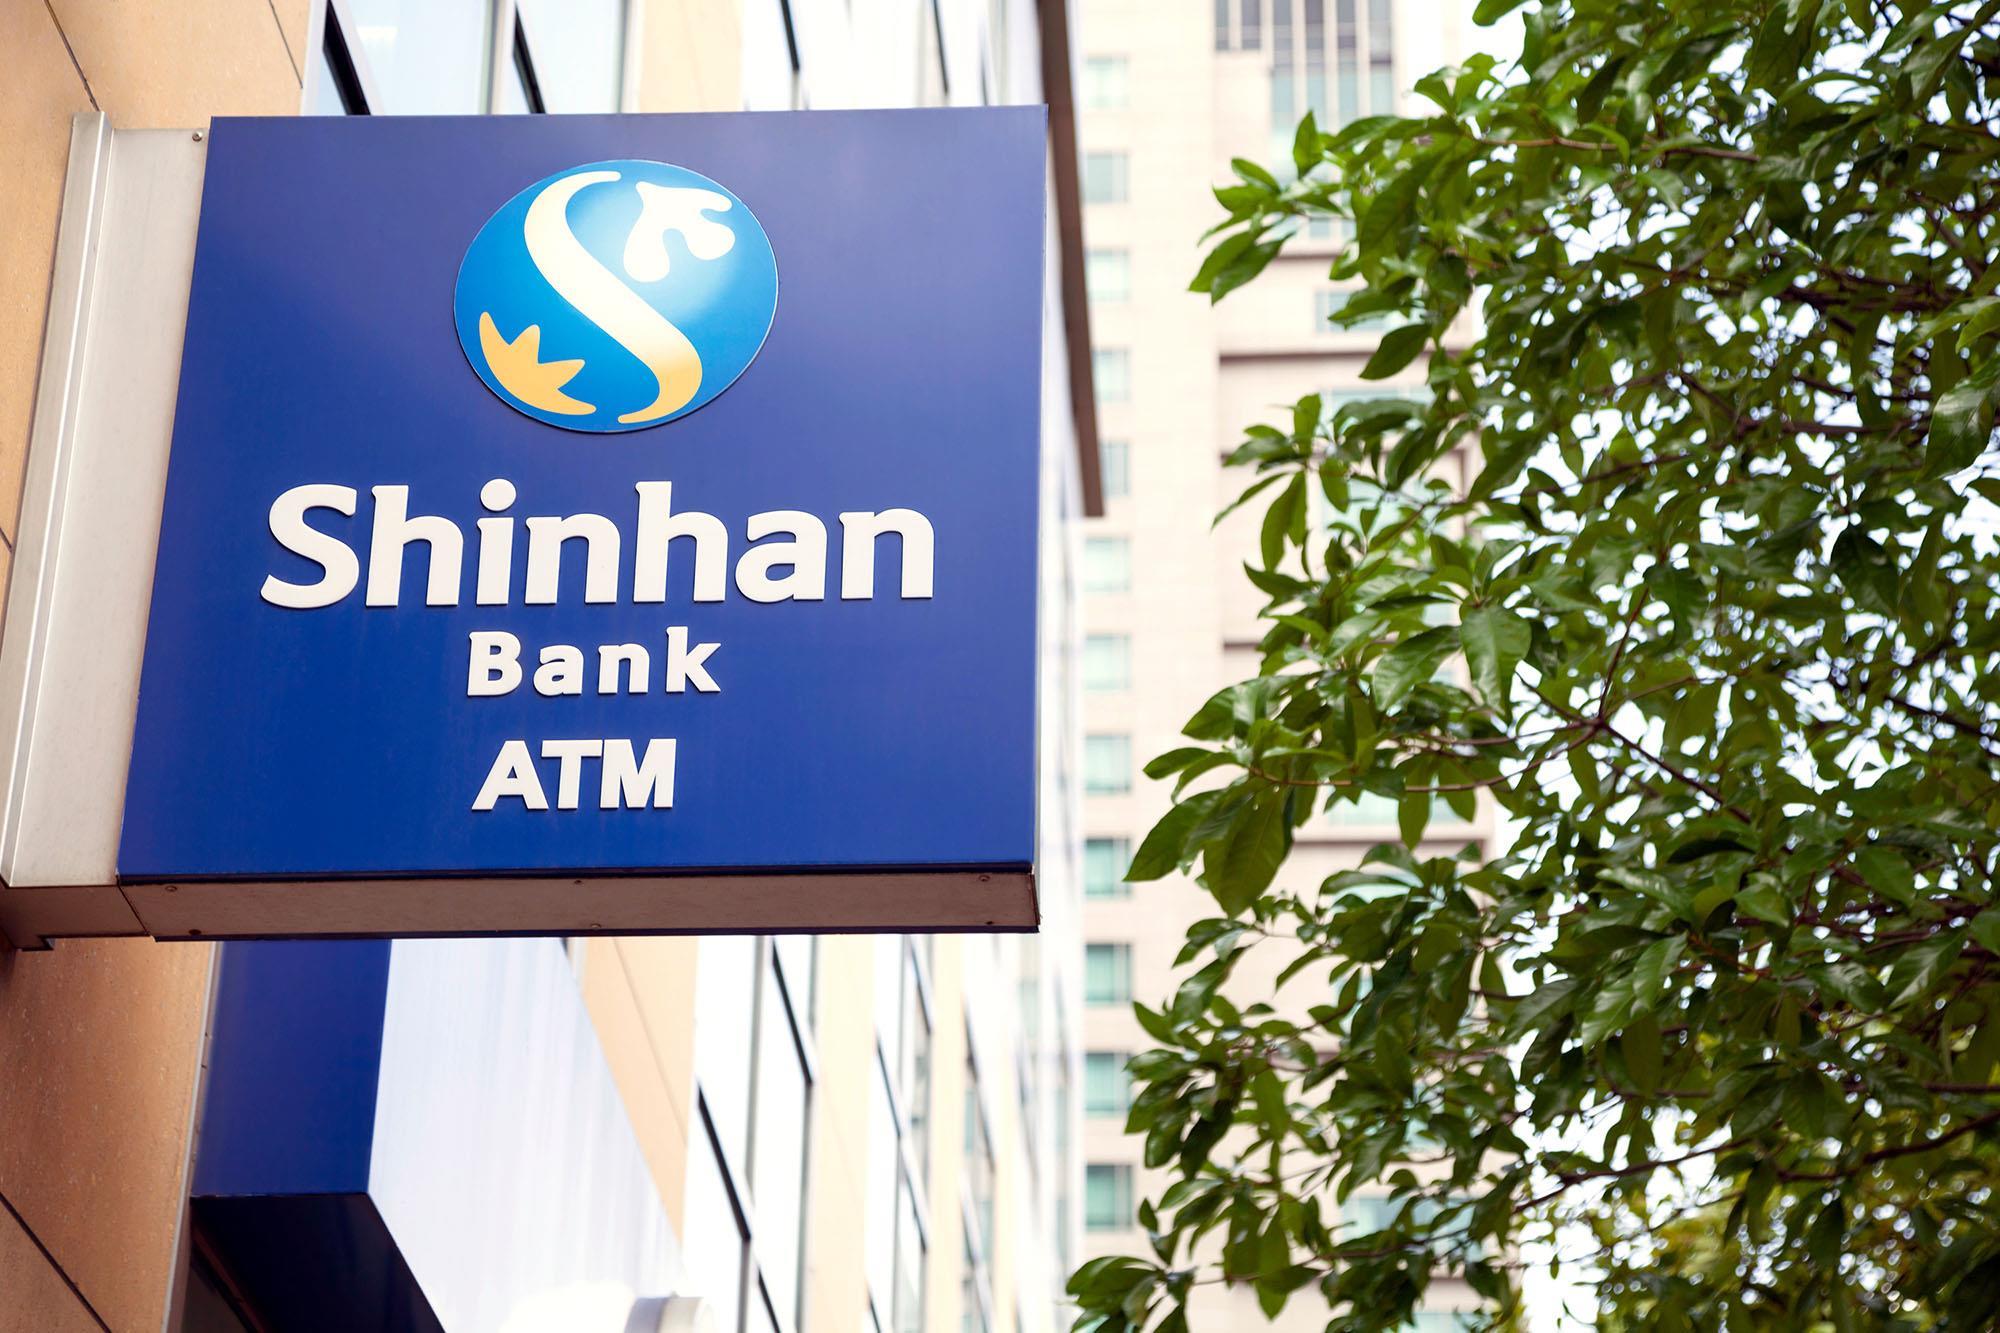 Shinhan Bank America fined $25M for repeat AML compliance failures, News  Brief